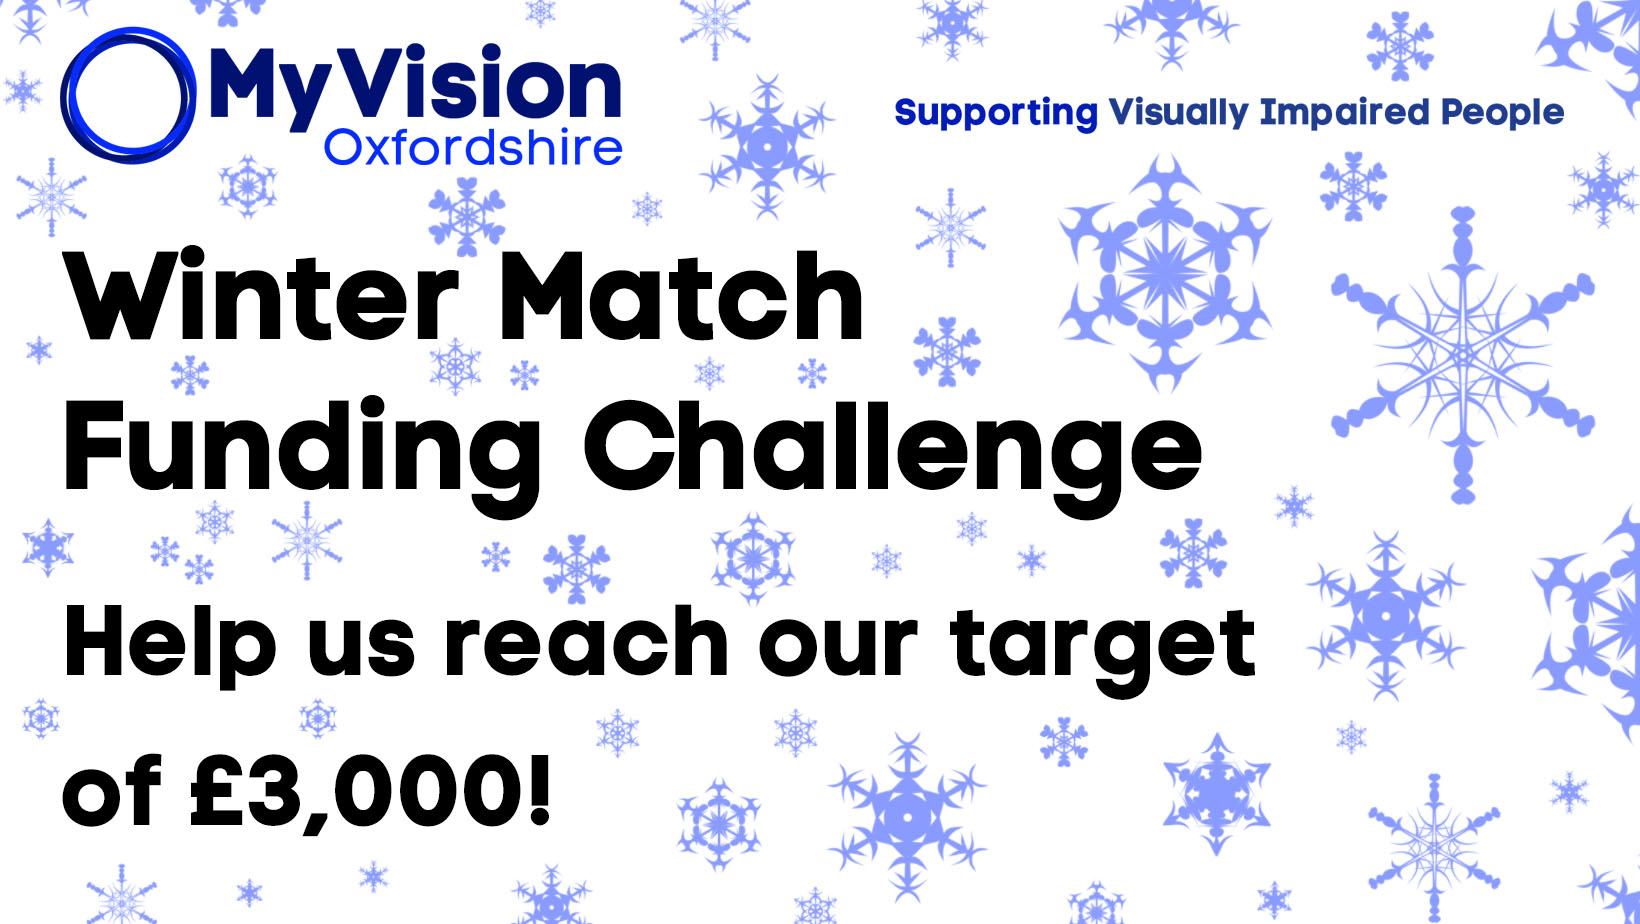 Poster that says, 'Winter Match Funding Challenge: Help us reach our target of £3,000!' There are many snowflakes in the background and a MyVision logo at the top of the page.